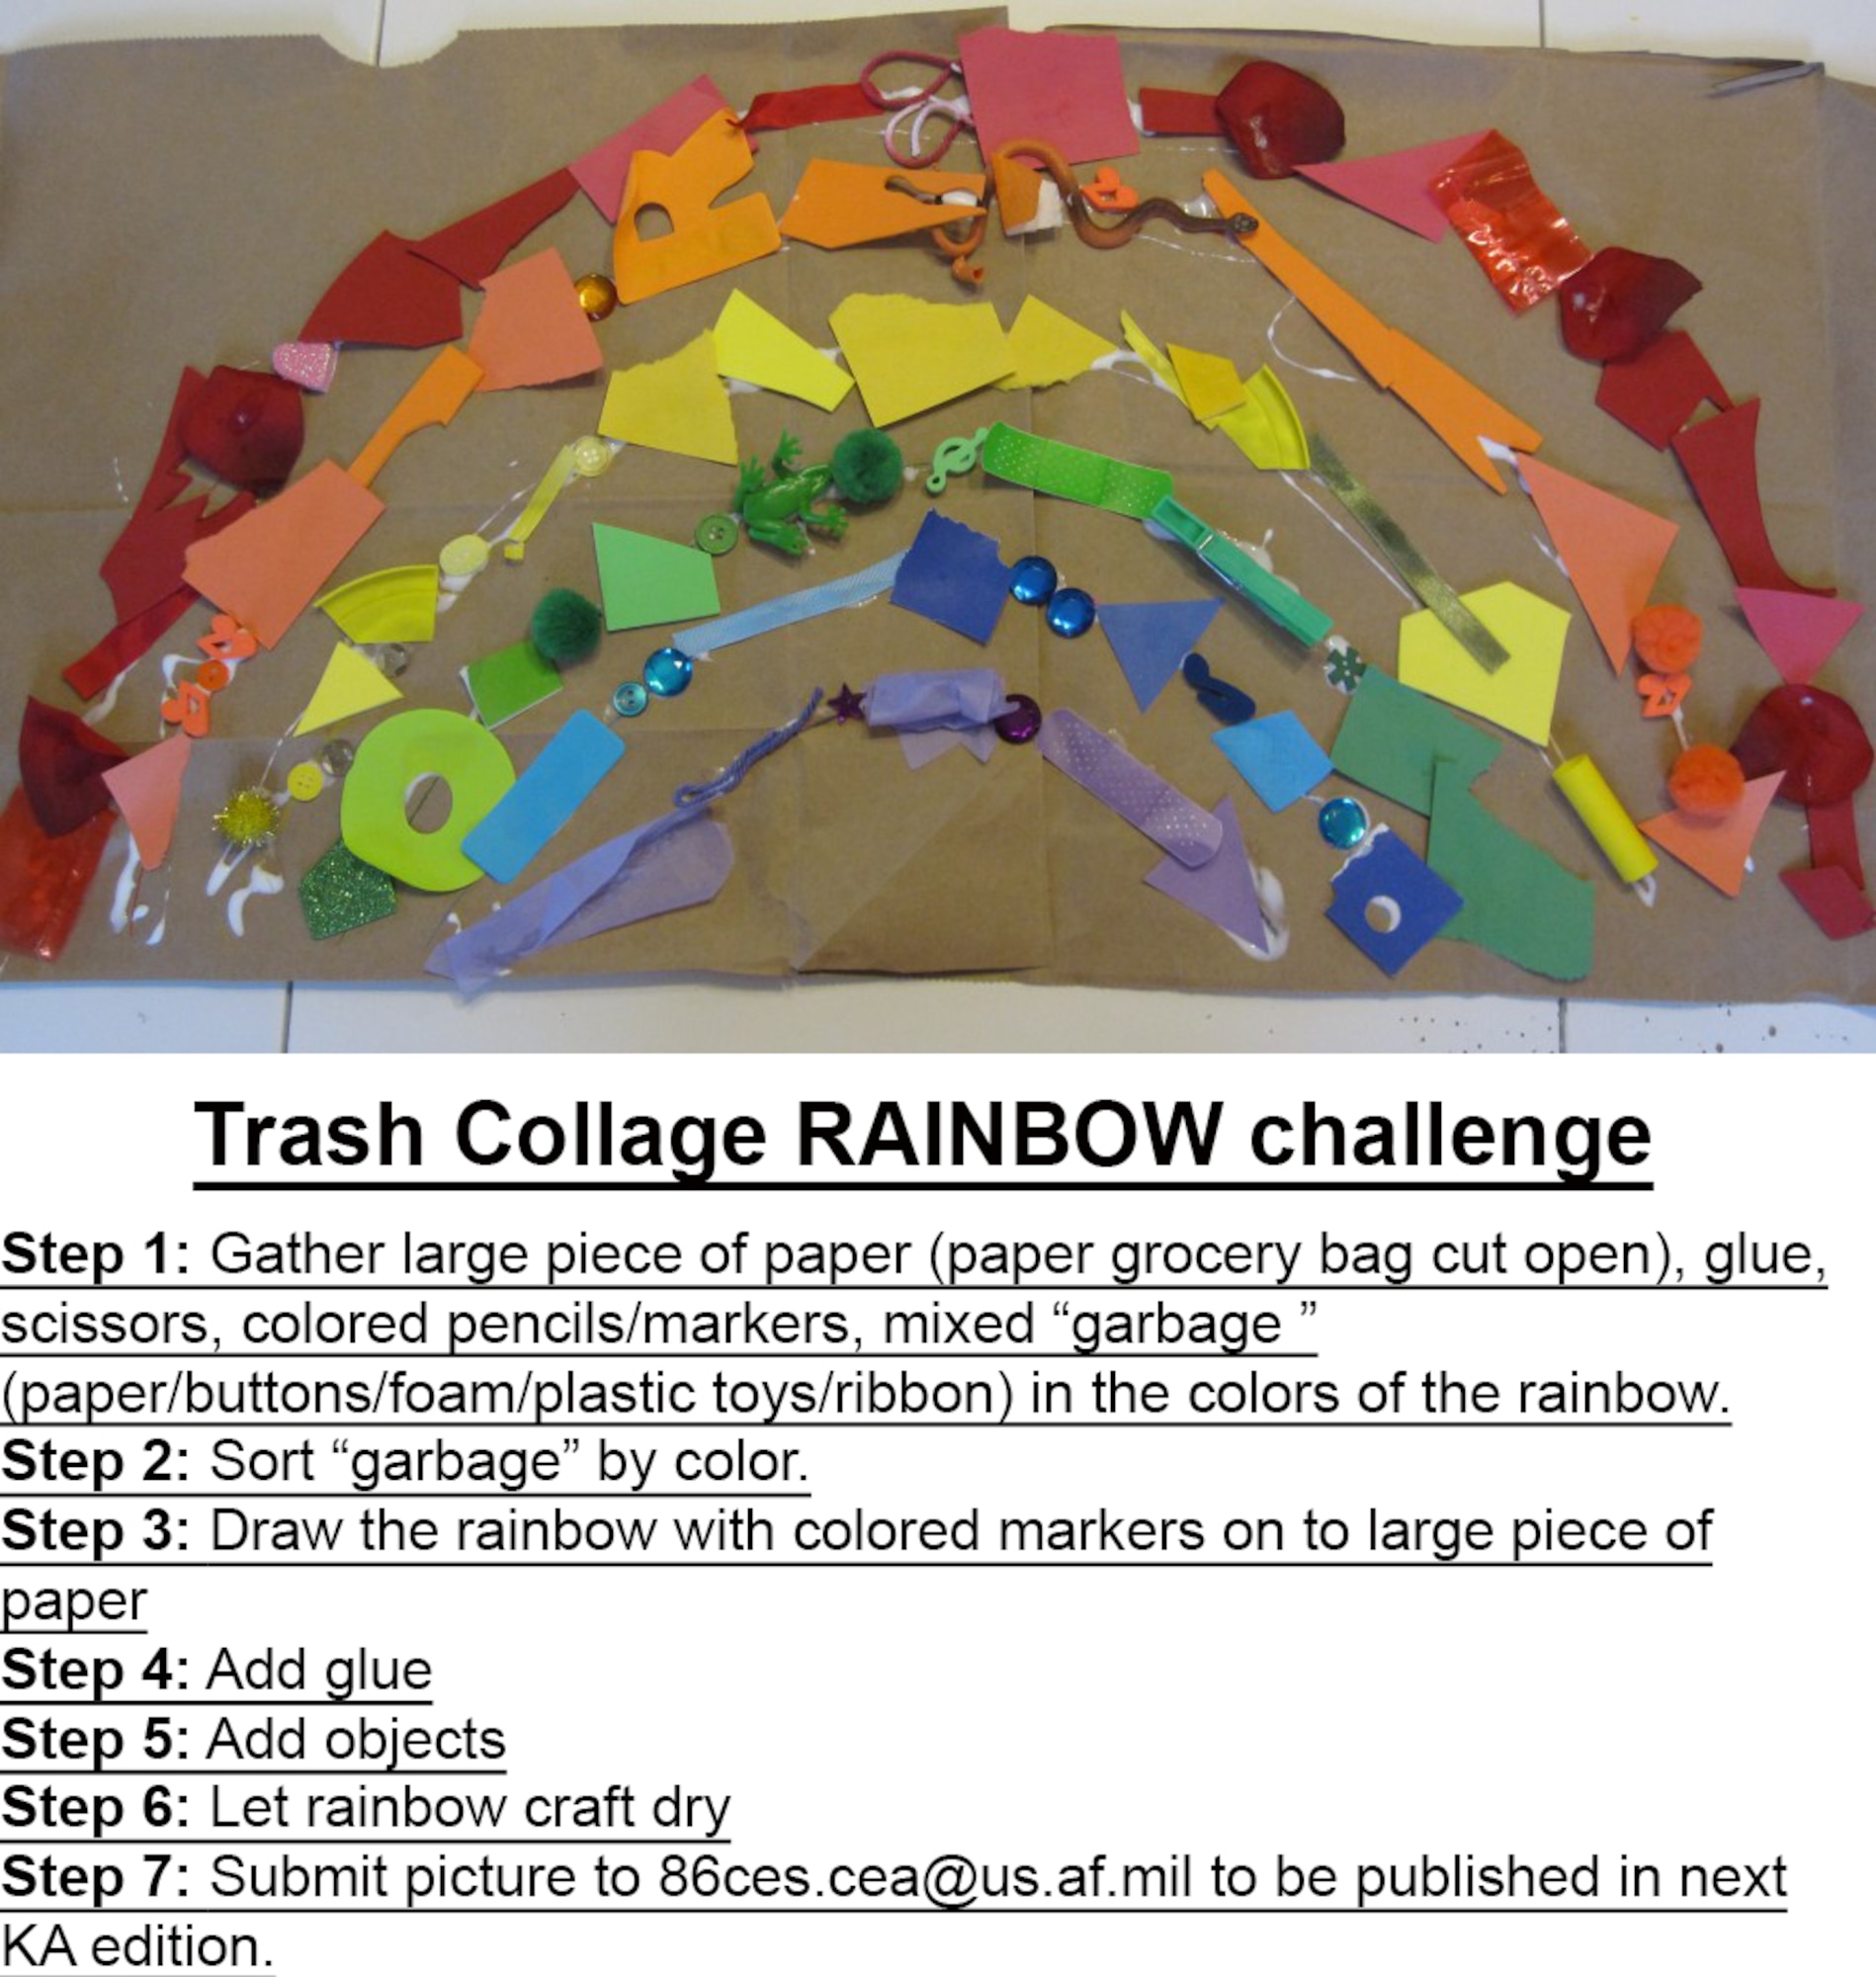 The 86th Civil Engineer Squadron Installation Management Flight offers a fun way for kids to create a rainbow from used scraps from around the house.